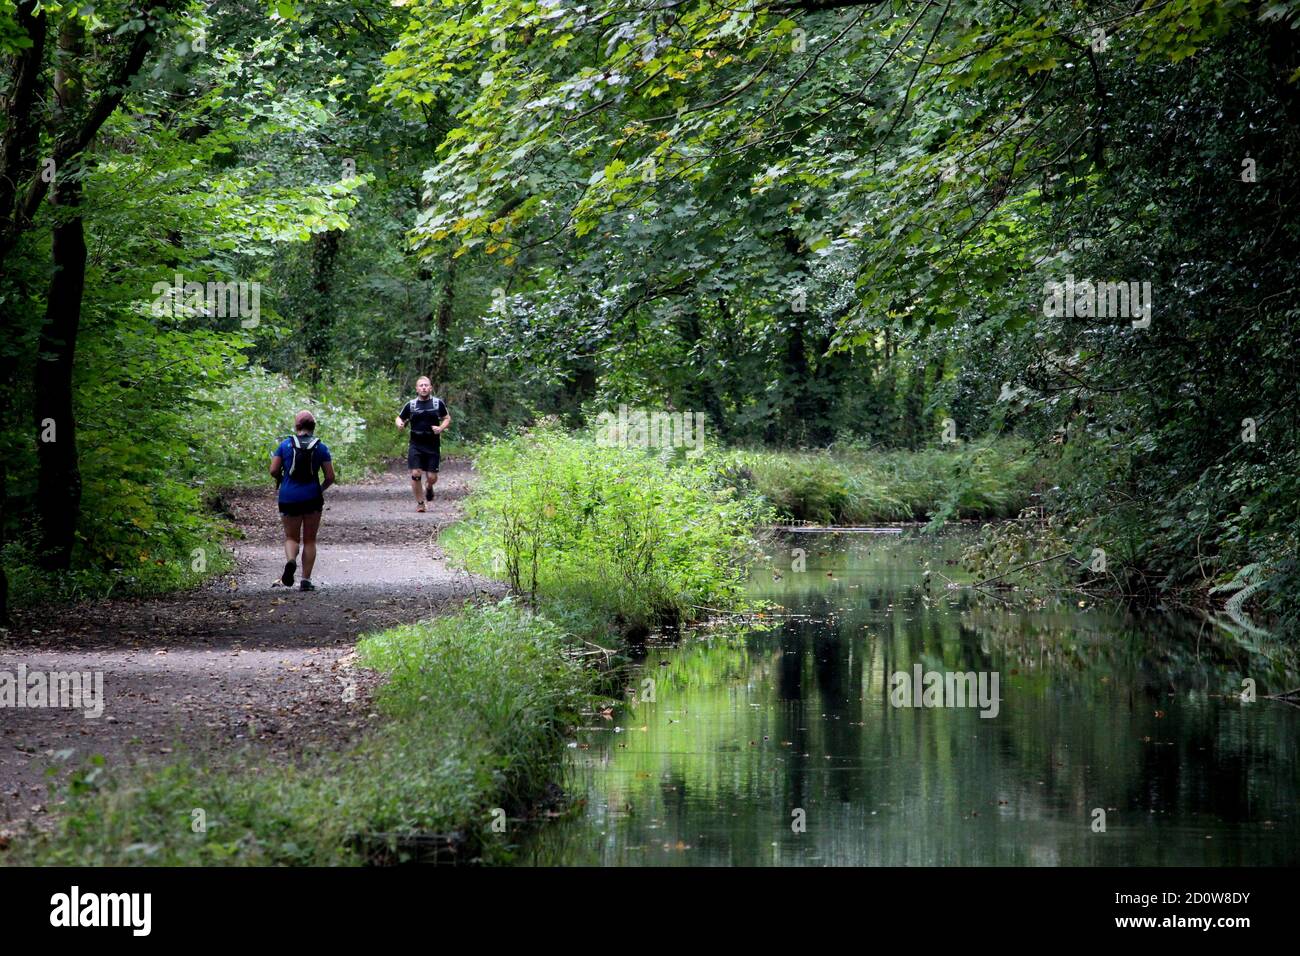 Two male runners take exercise alongside a still and calm river Stock Photo